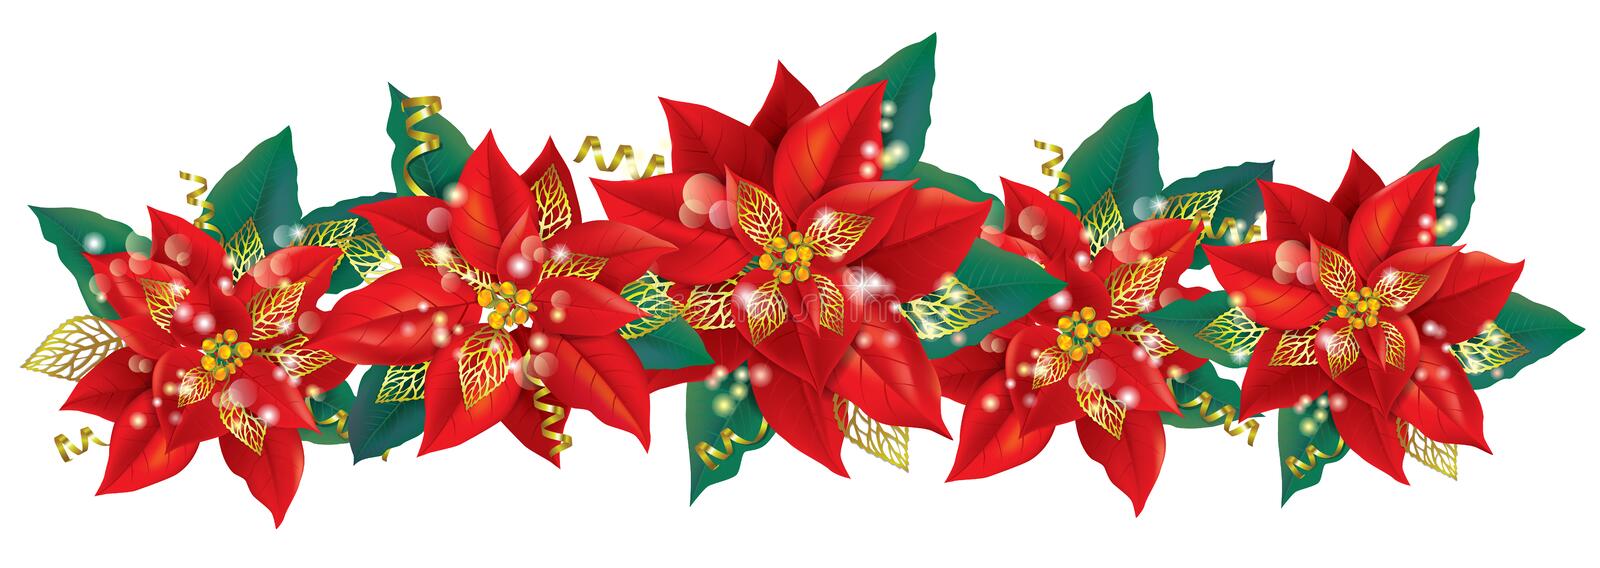 christmas-garland-poinsettia-contains-transparent-objects-eps-34758674